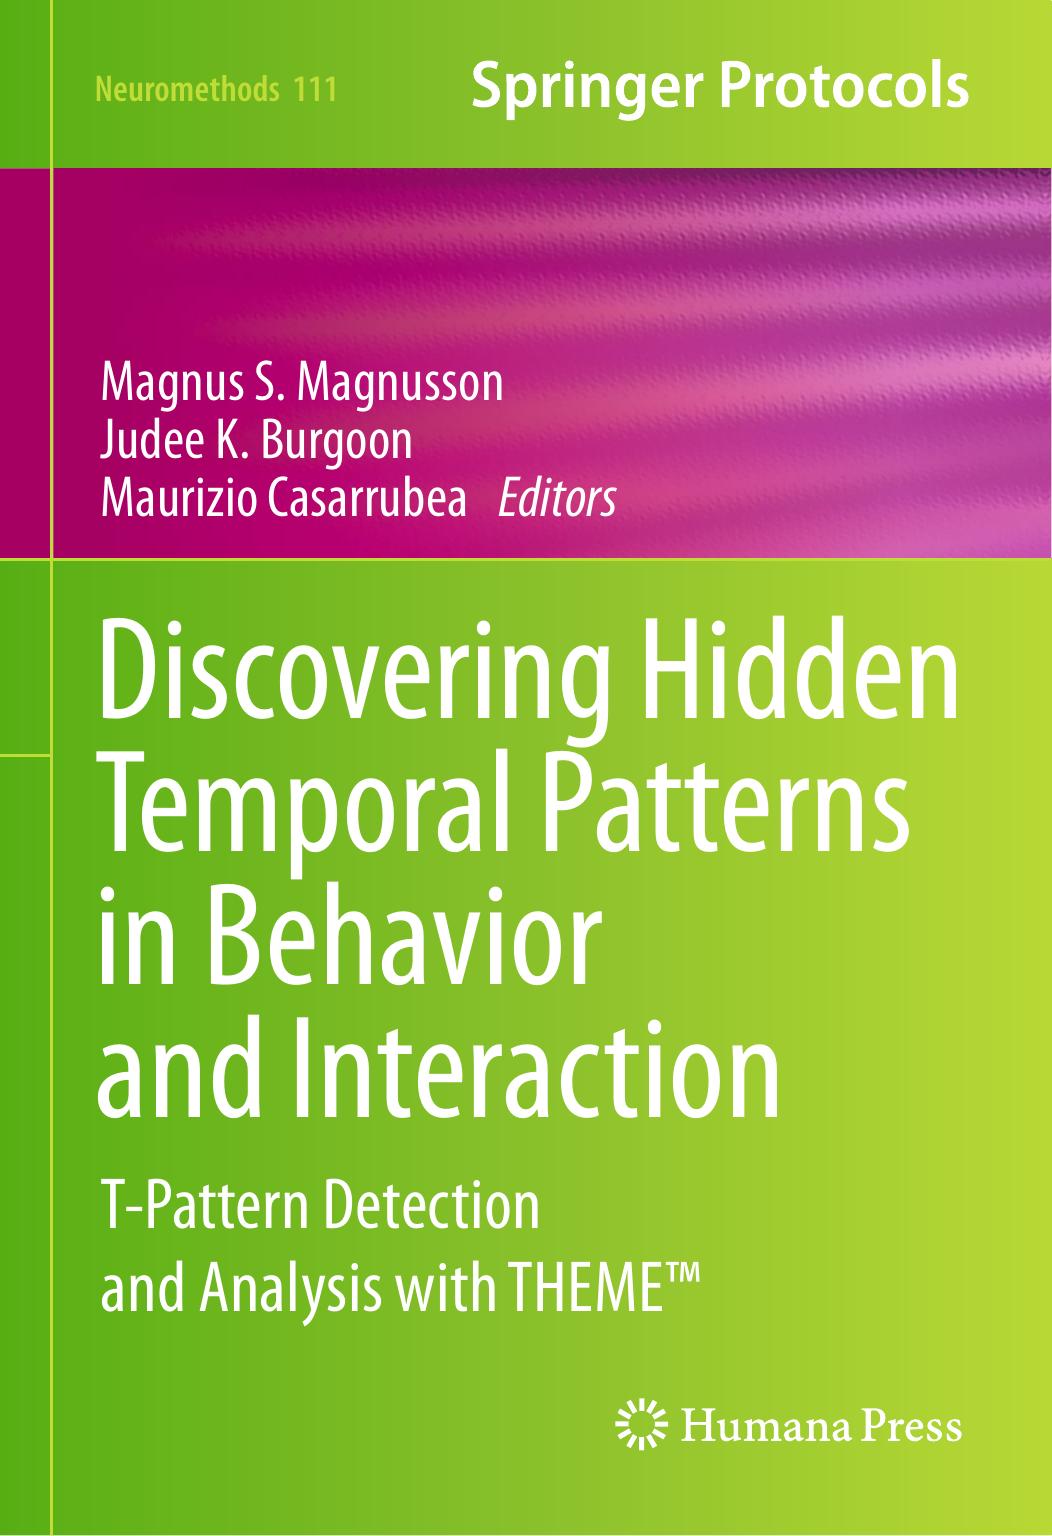 Discovering Hidden Temporal Patterns in Behavior and Interaction: T-Pattern Detection and Analysis With THEME™